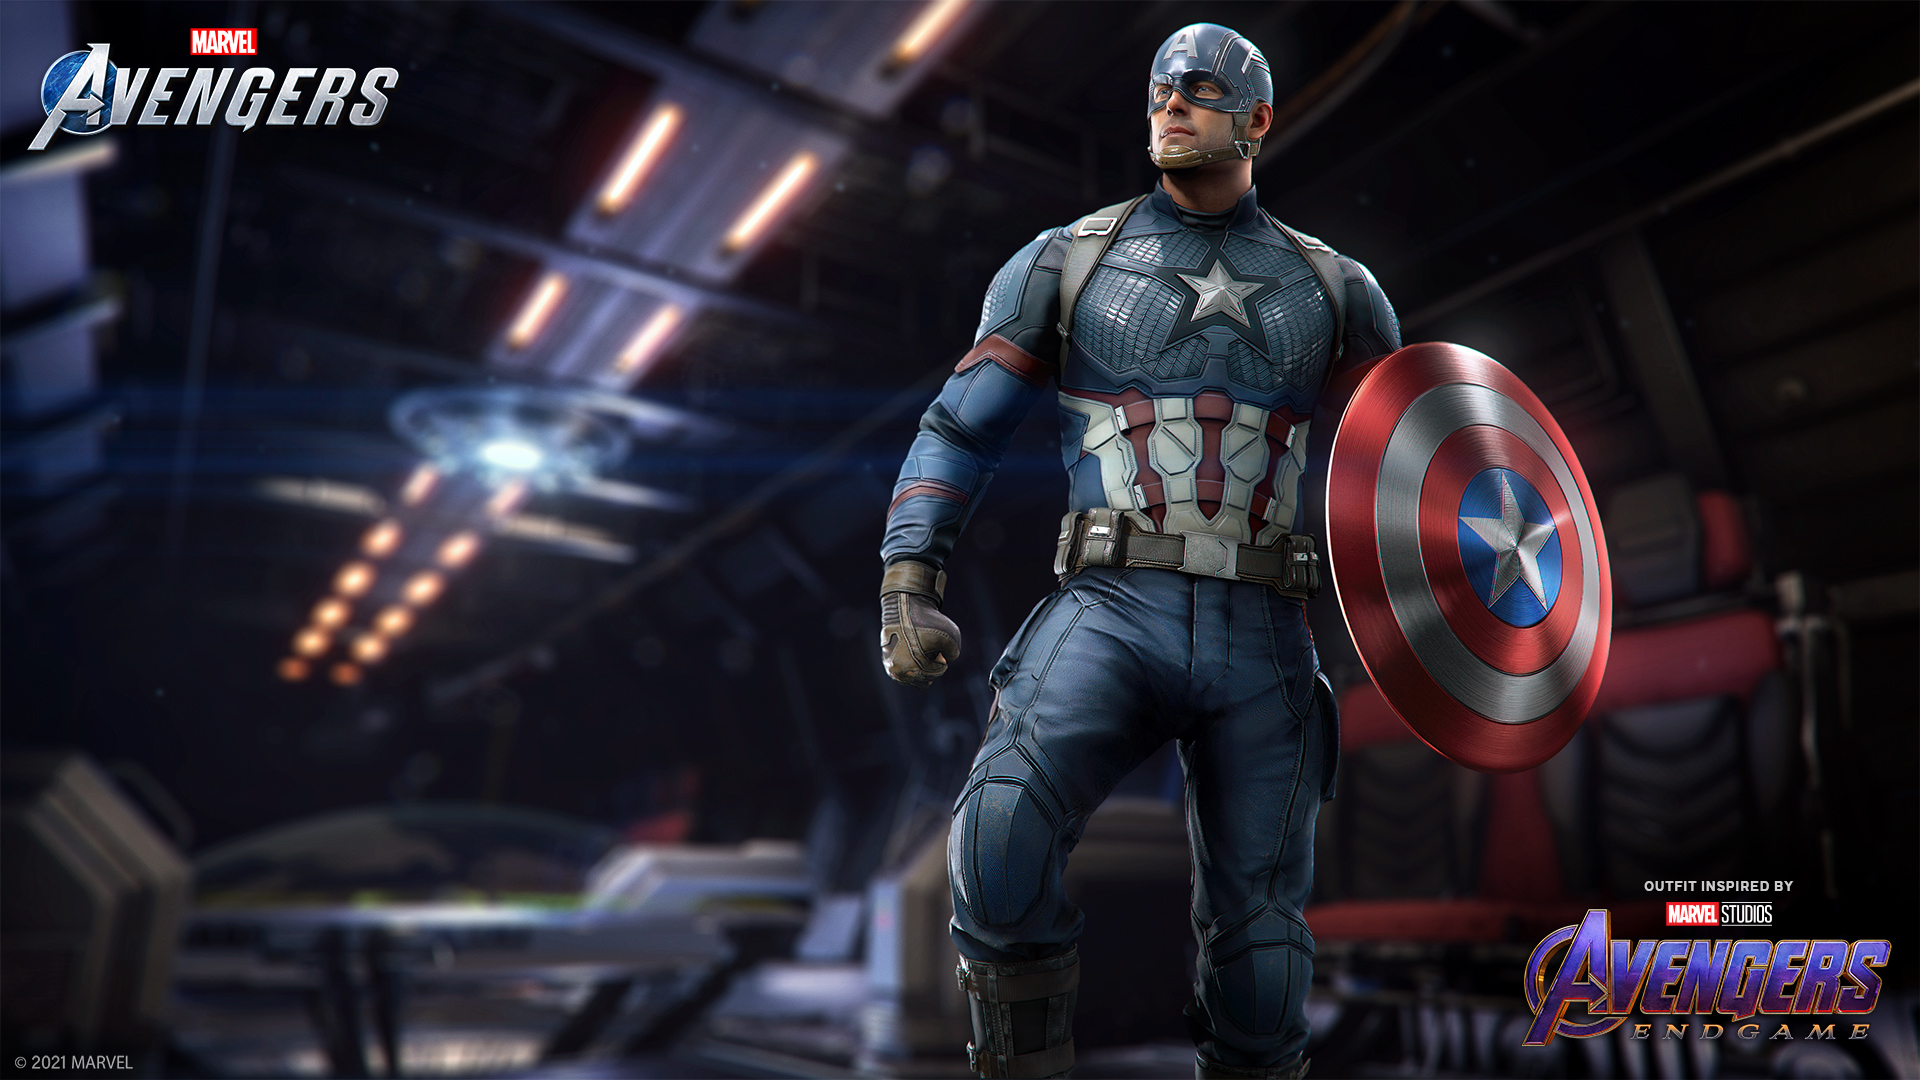 Marvel's Avengers, assemble. Inspired by the Marvel Cinematic Universe, Captain America's Marvel Studios' Avengers: Endgame Outfit features a leader preparing for battle with his iconic shield. Get it in